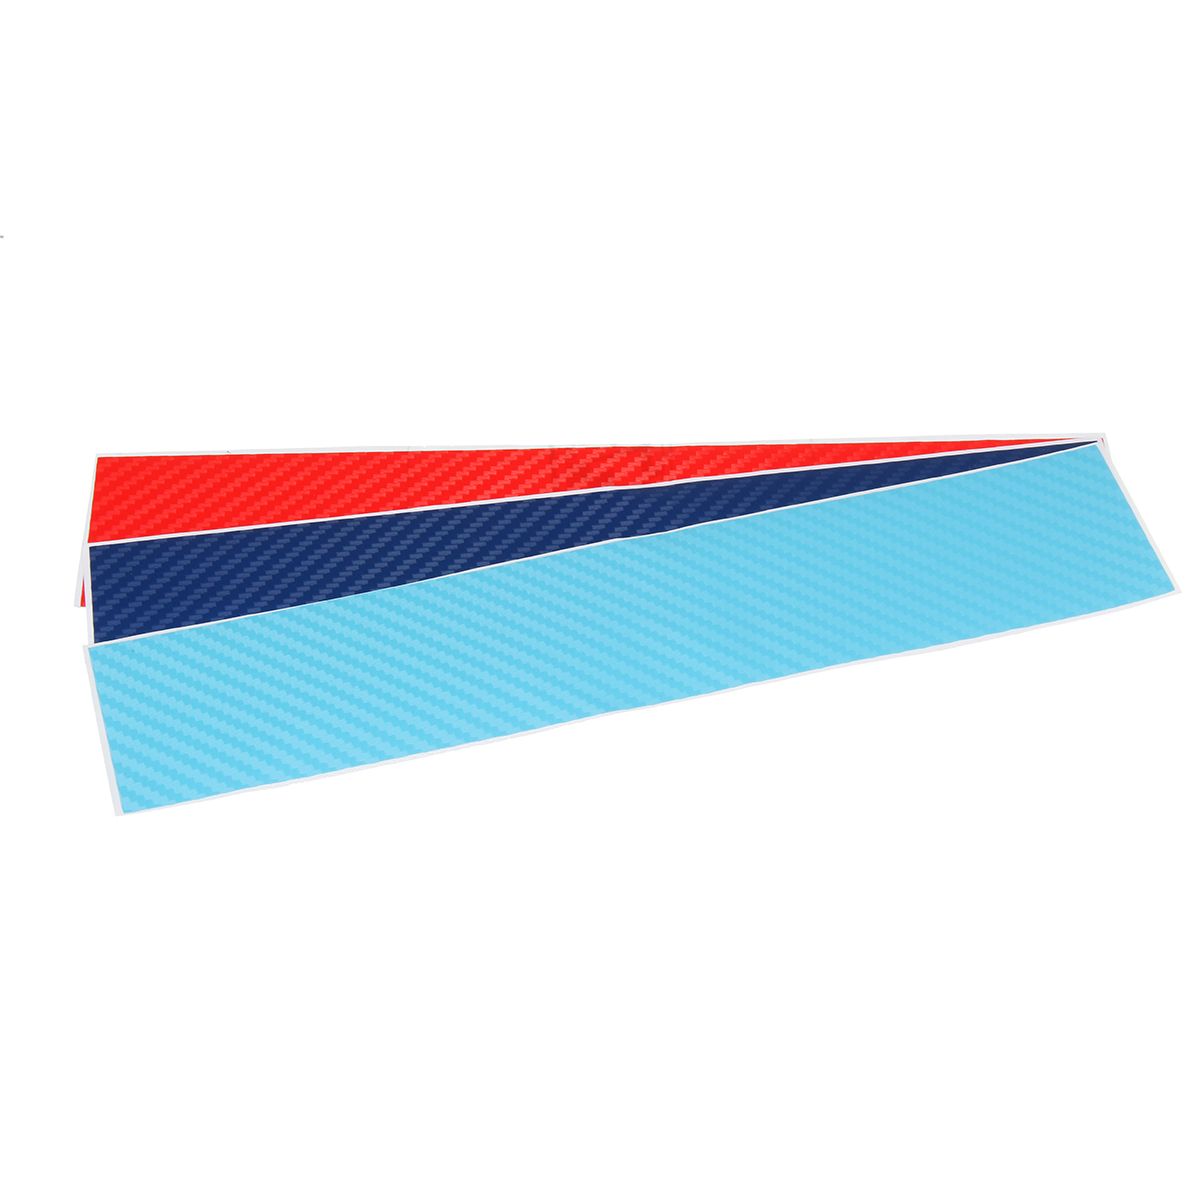 3-Colors-Carbon-Fiber-Stripe-Sticker-Decal-For-BMW-Front-Grill-Grille-Exterior-Car-Stickers-1562468